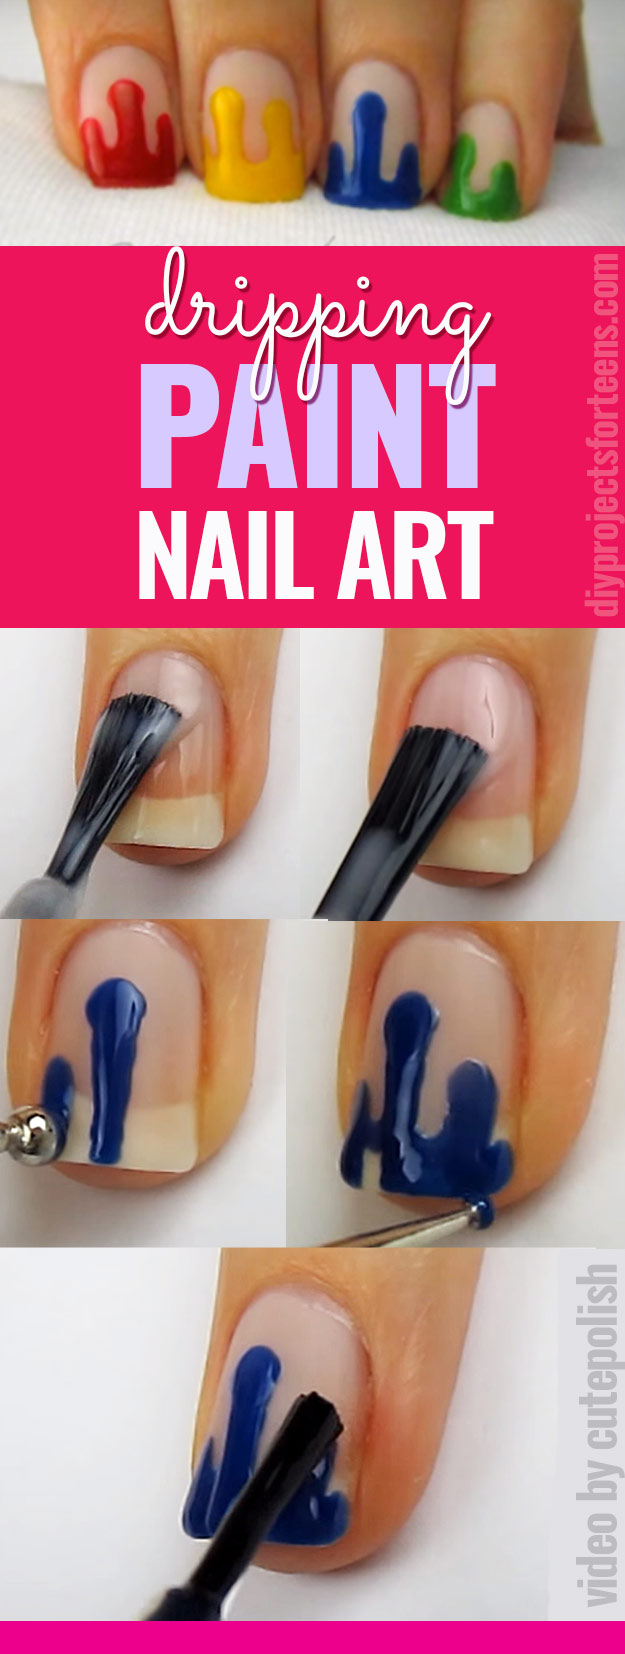 Cool Nail Art Ideas - Dripping Paint Nail Polish - Fun for Teens and Tweens- Nail Polish Design Ideas- Candy Coat Stars and Stripes Nail Design Tutorial - Easy Nail Art Tutorials - Fun and Easy DIY Nail Designs - Step By Step Tutorials and Instructions for Manicures at Home - 